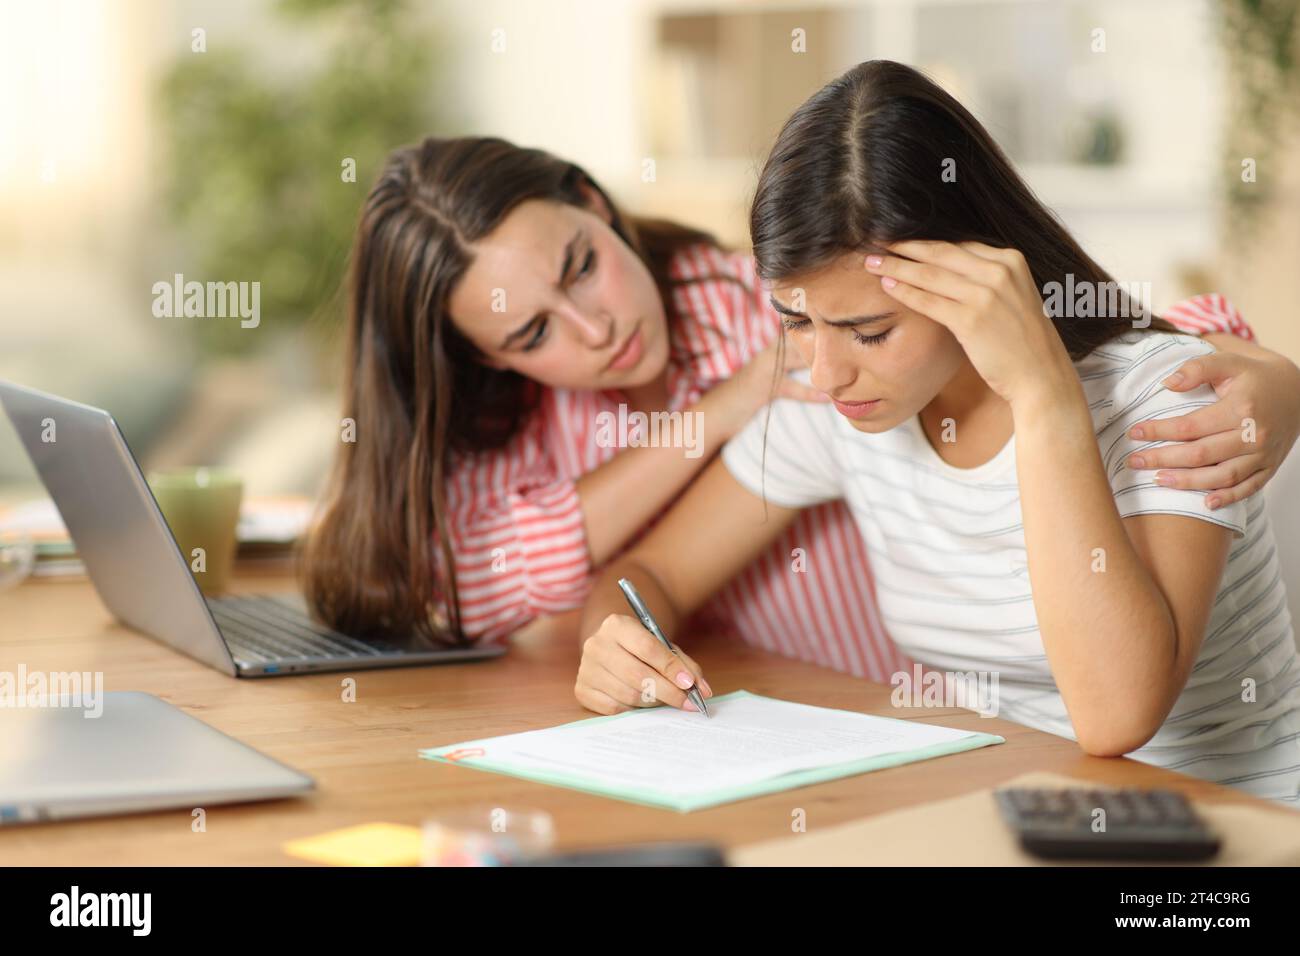 Worker comforting a sad colleague signing contract tele working at home Stock Photo